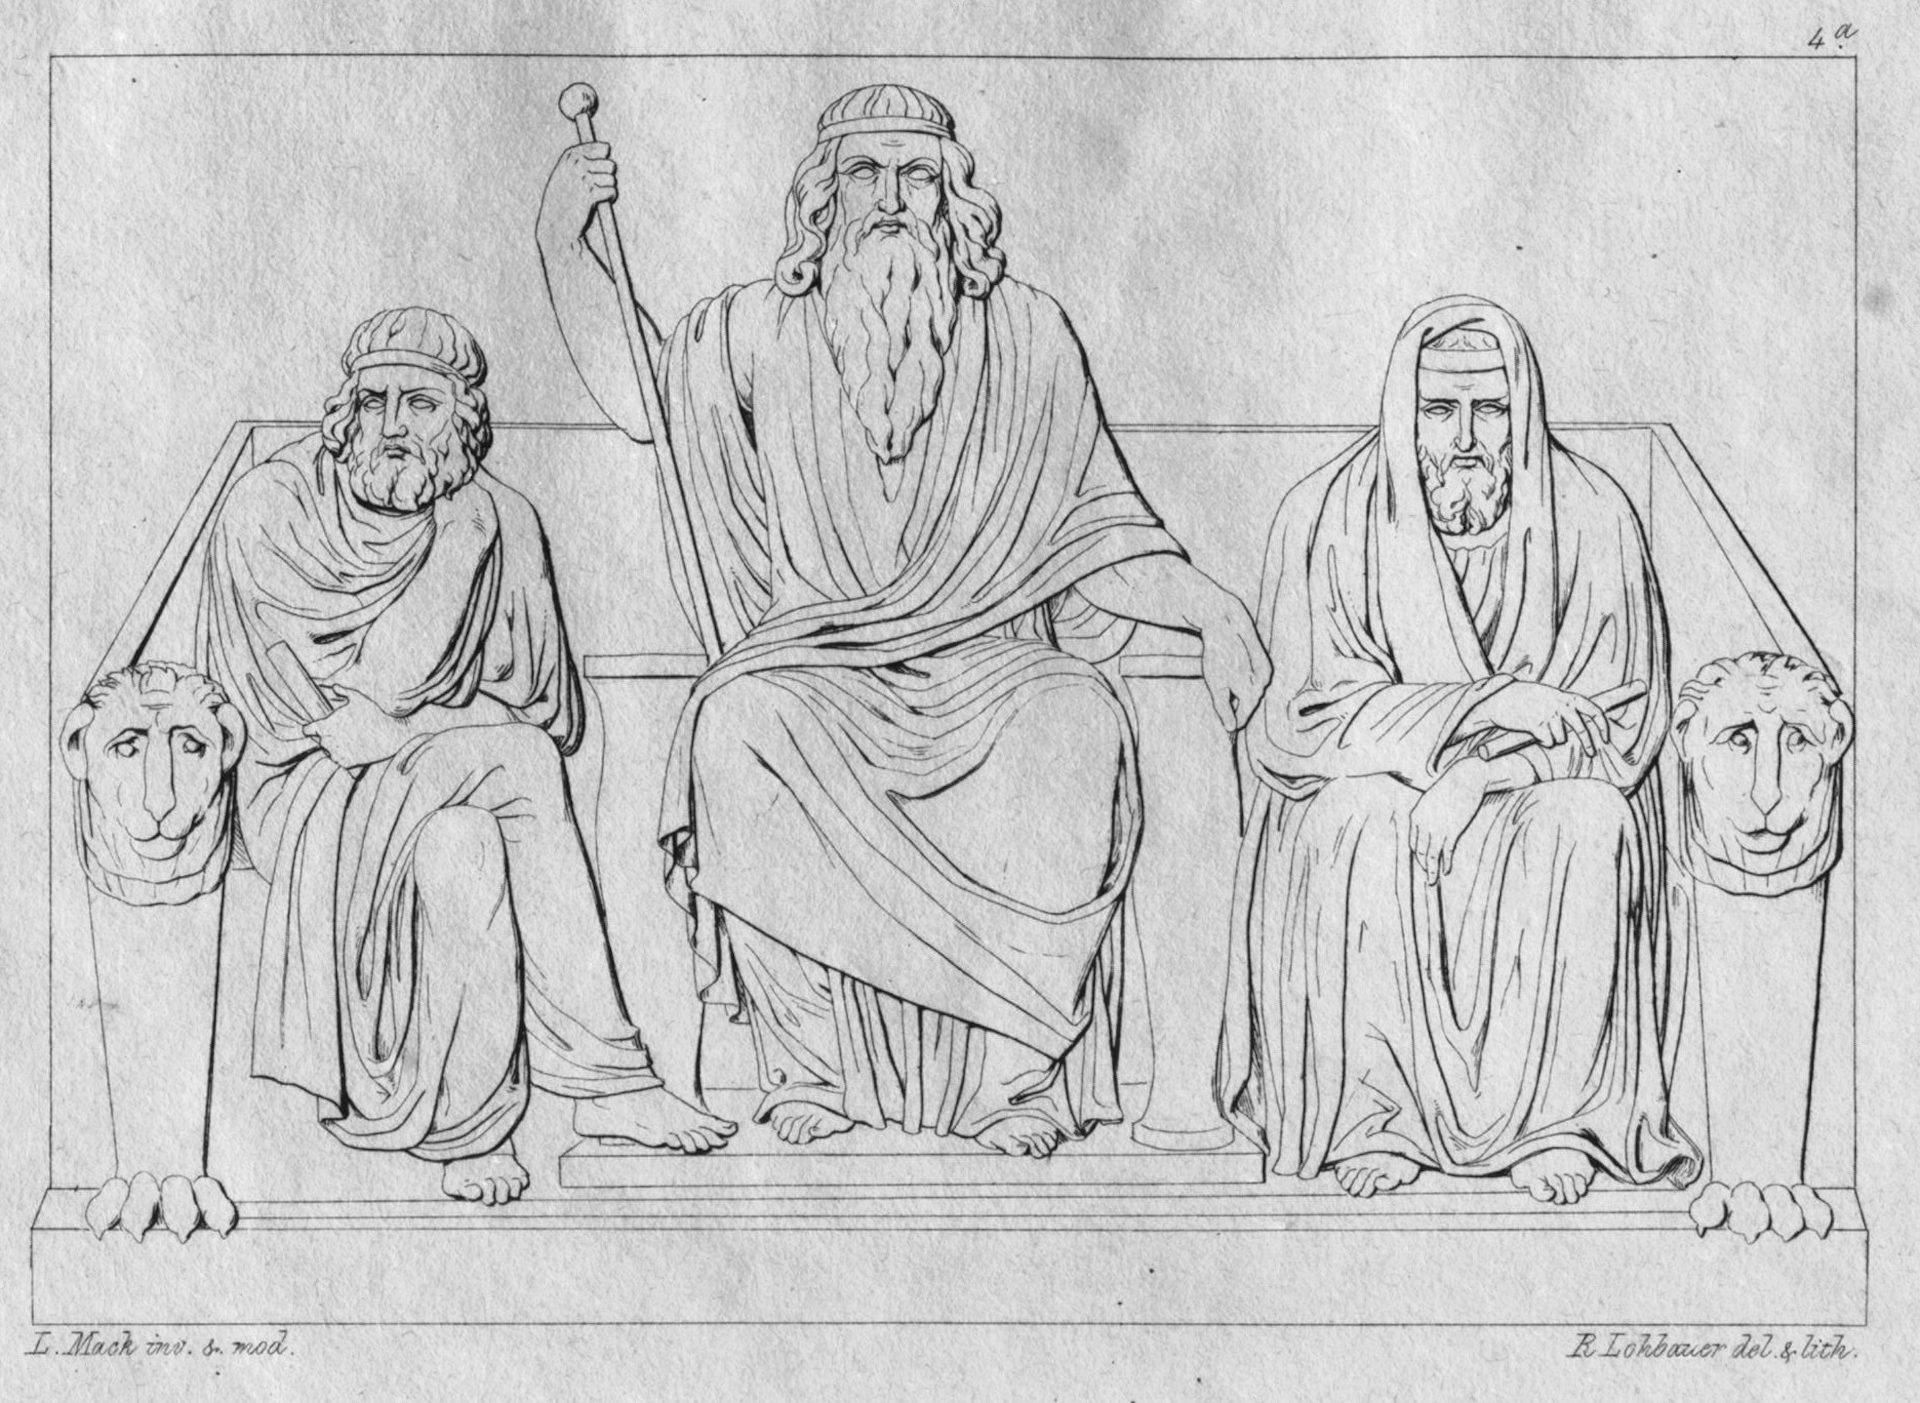 Illustration of the judges of the Underworld by Ludwig Mack